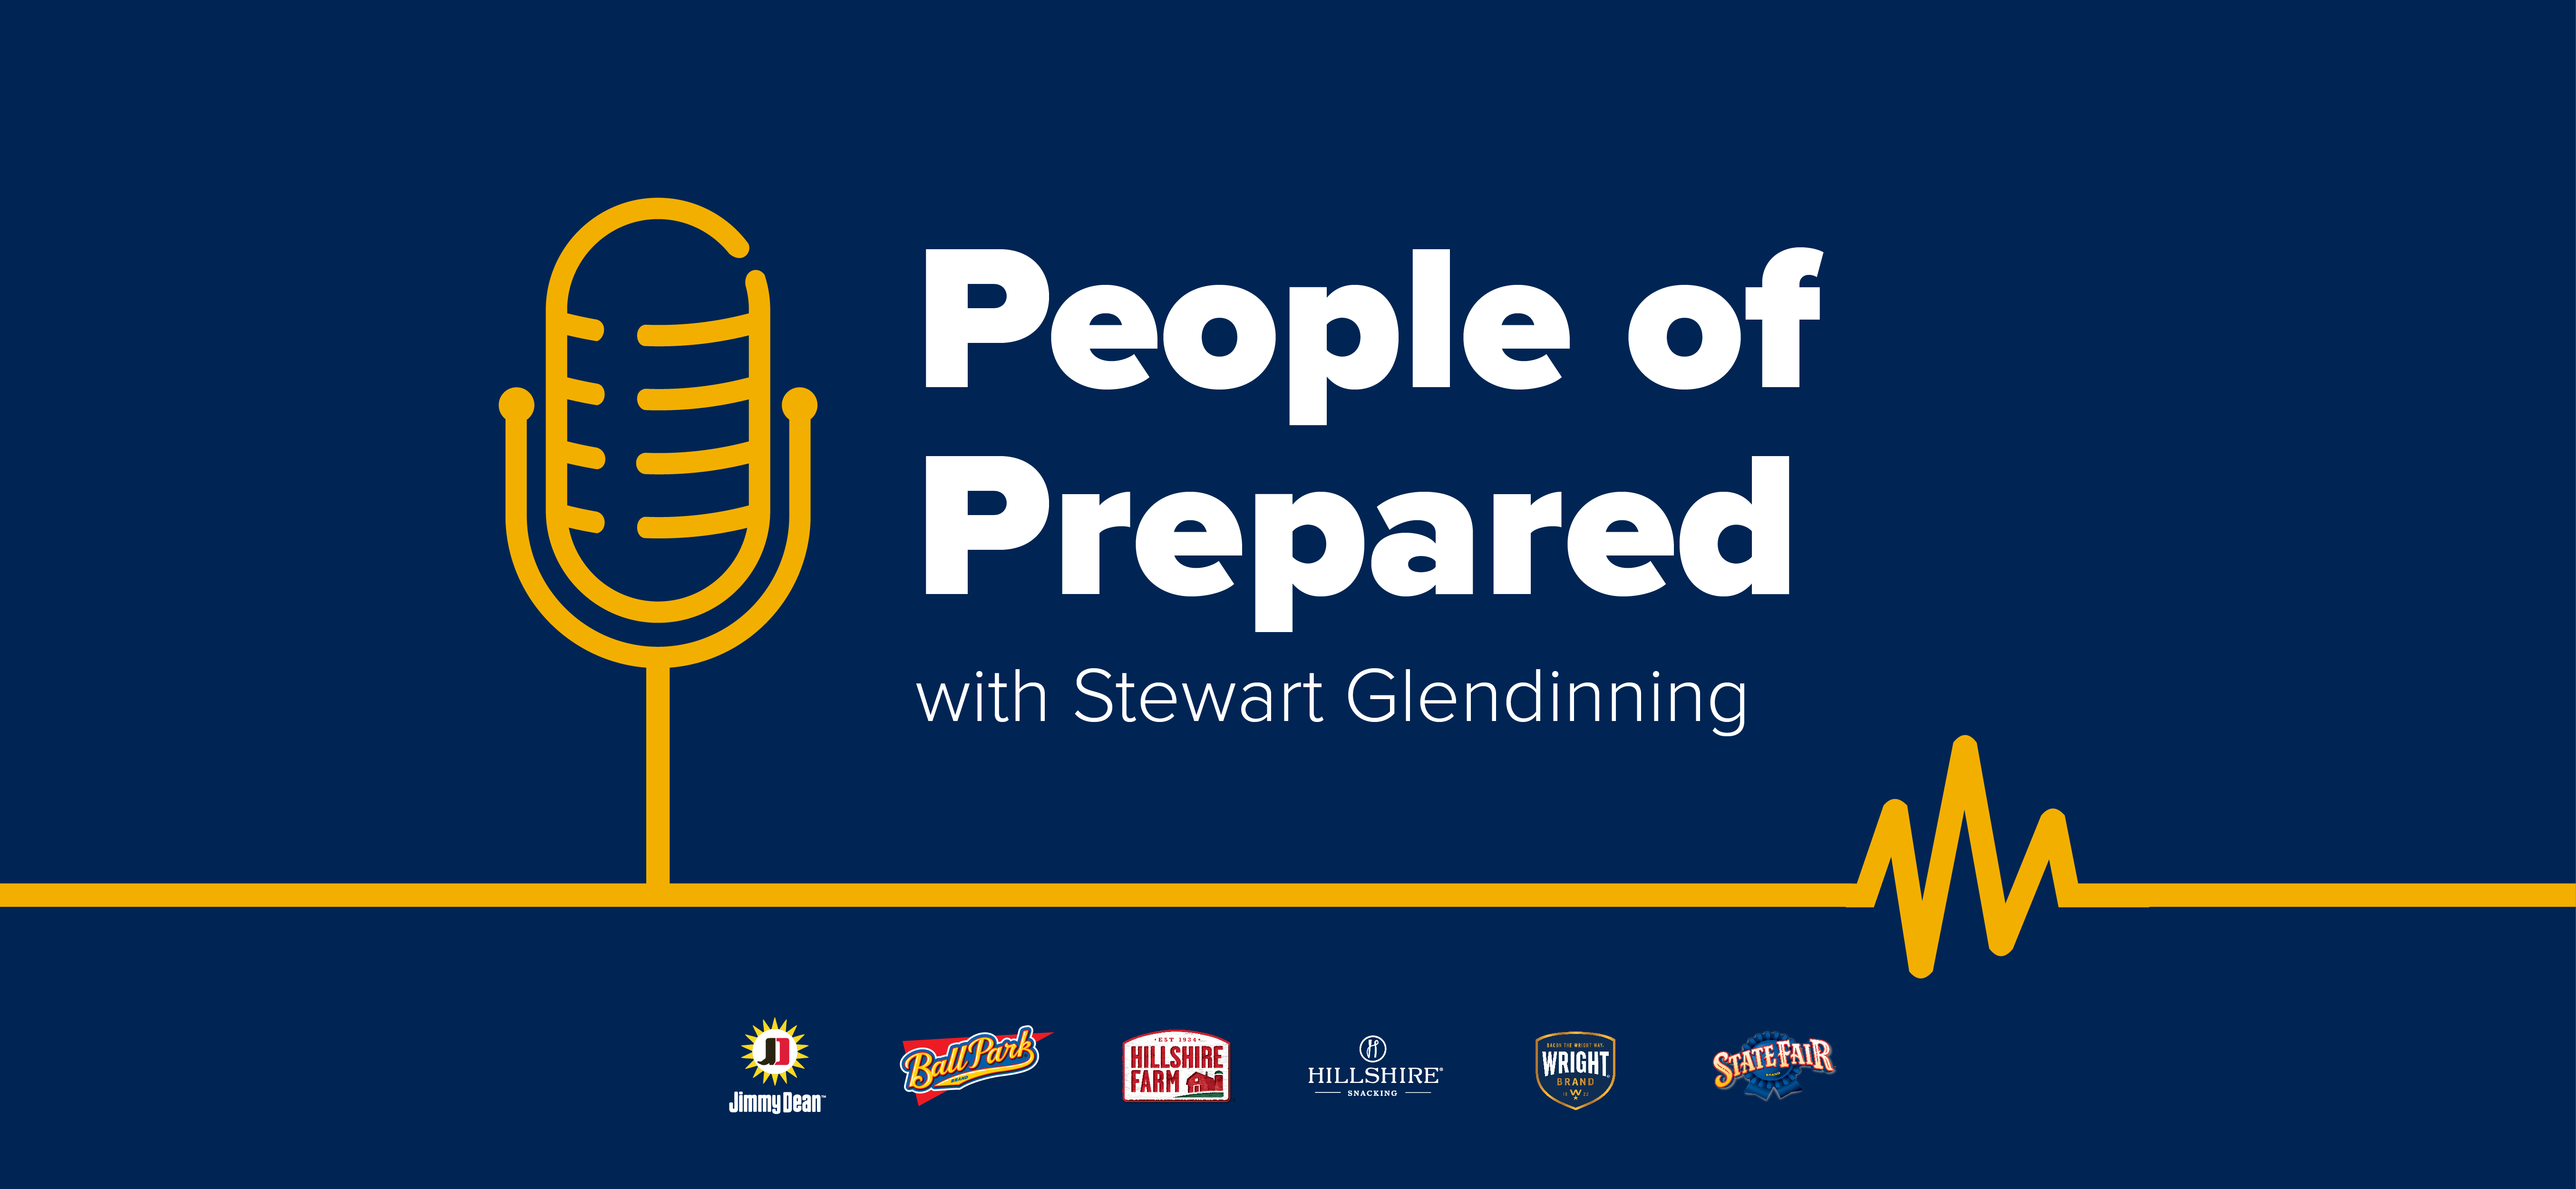 This is a header image of the People of Prepared podcast.